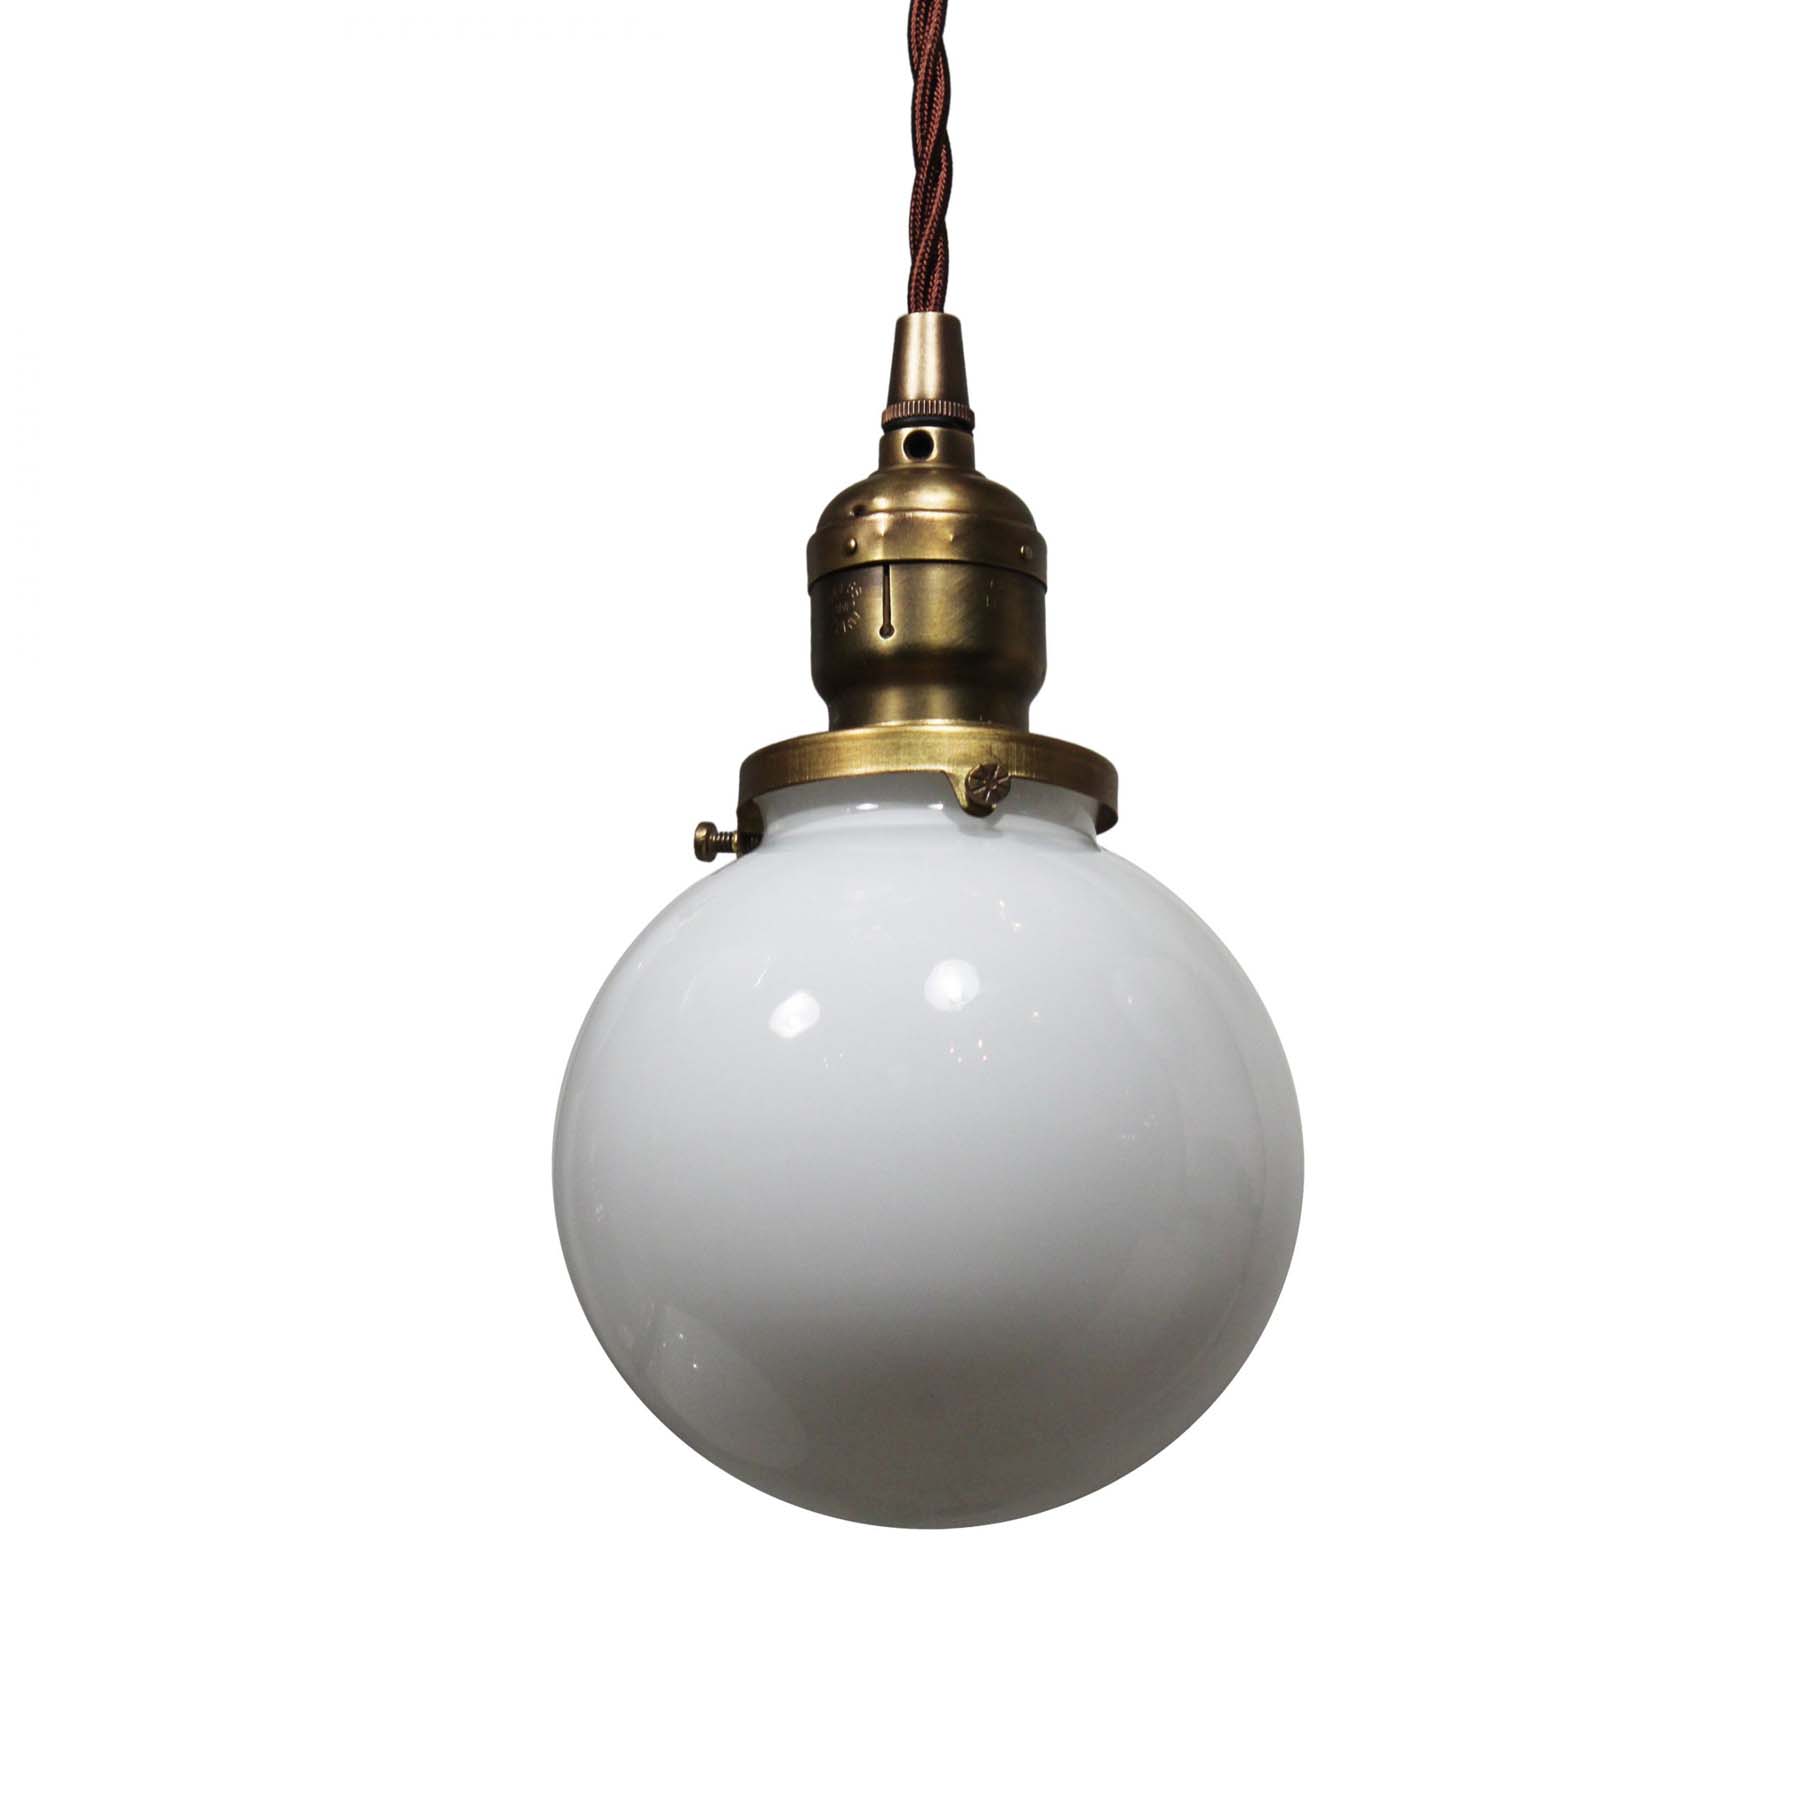 SOLD Antique Semi-Flush Brass Chandelier with Ball Shades-69364